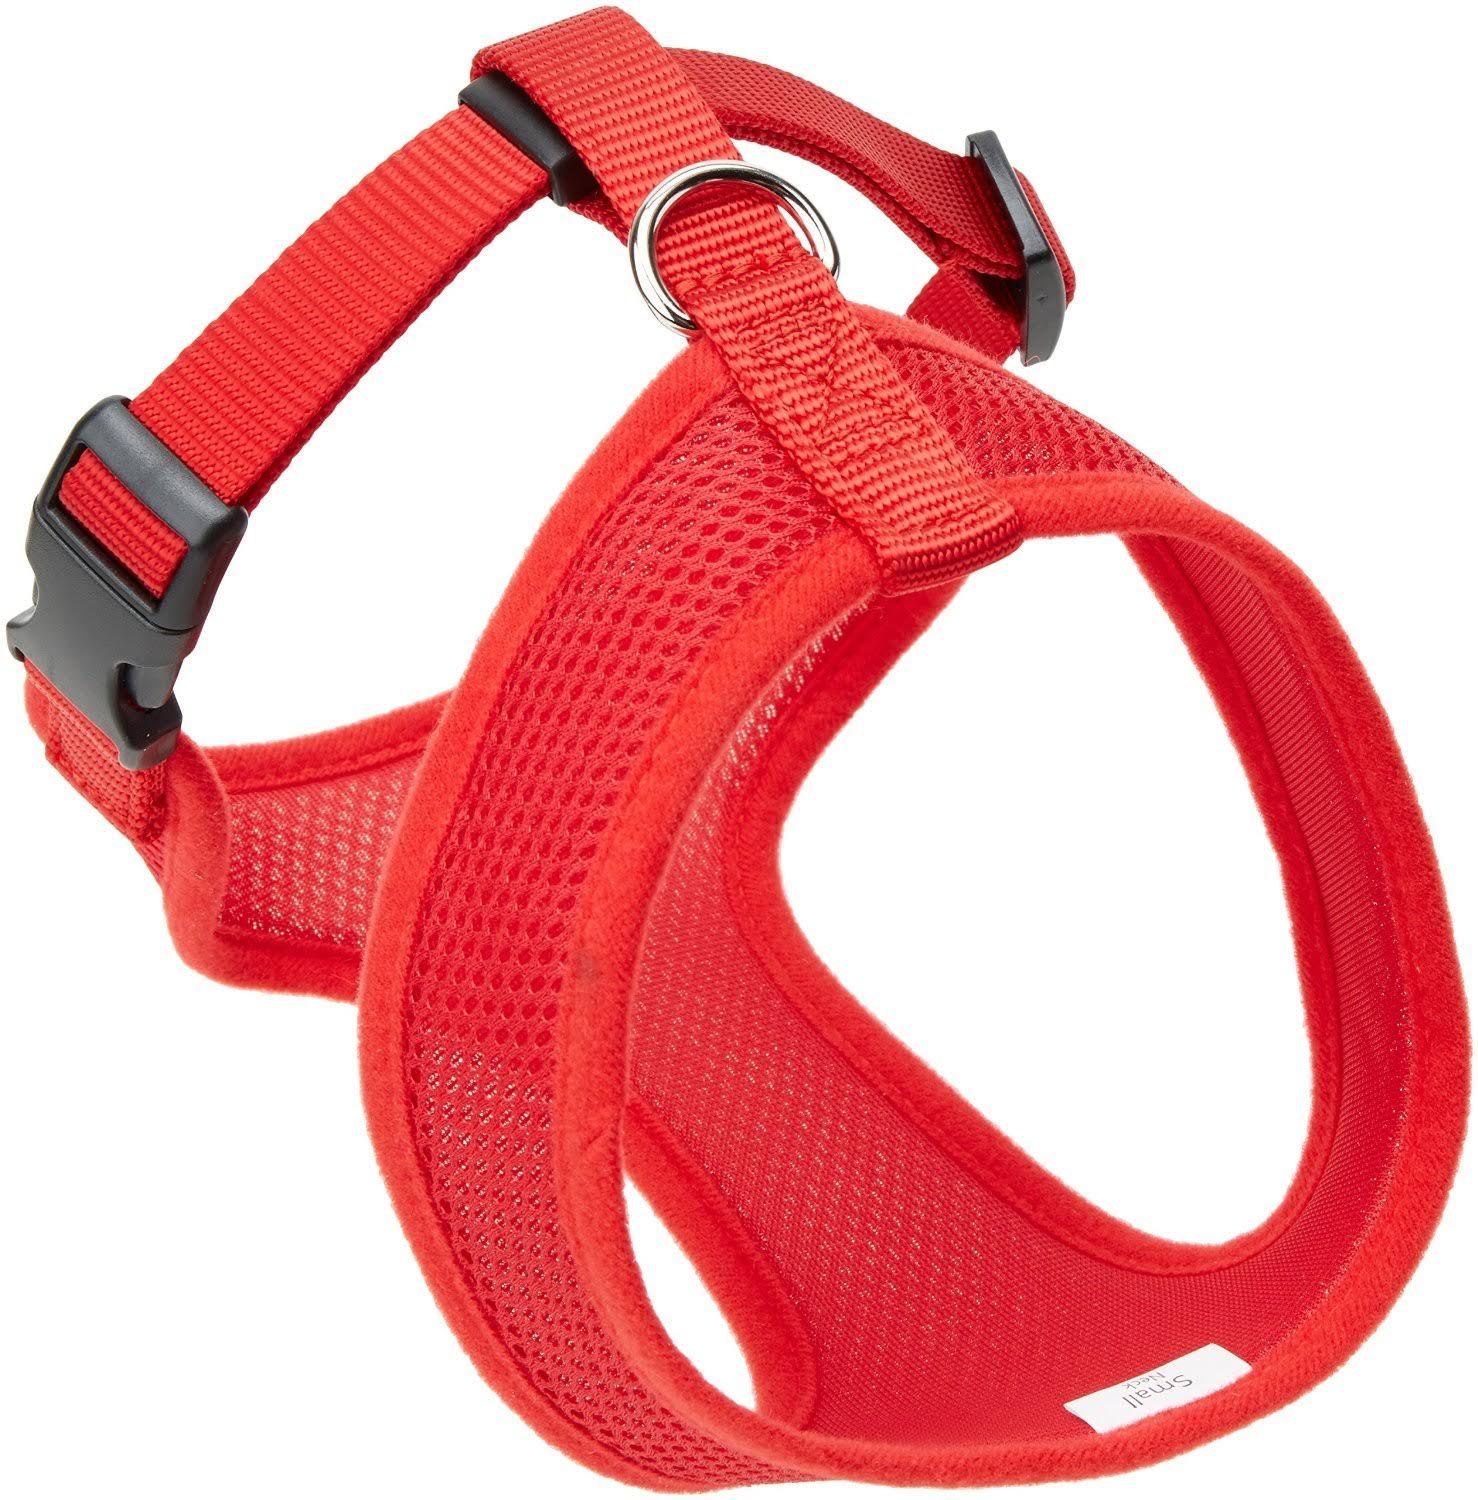 Coastal Pet Products Soft Adjustable Harness - Red